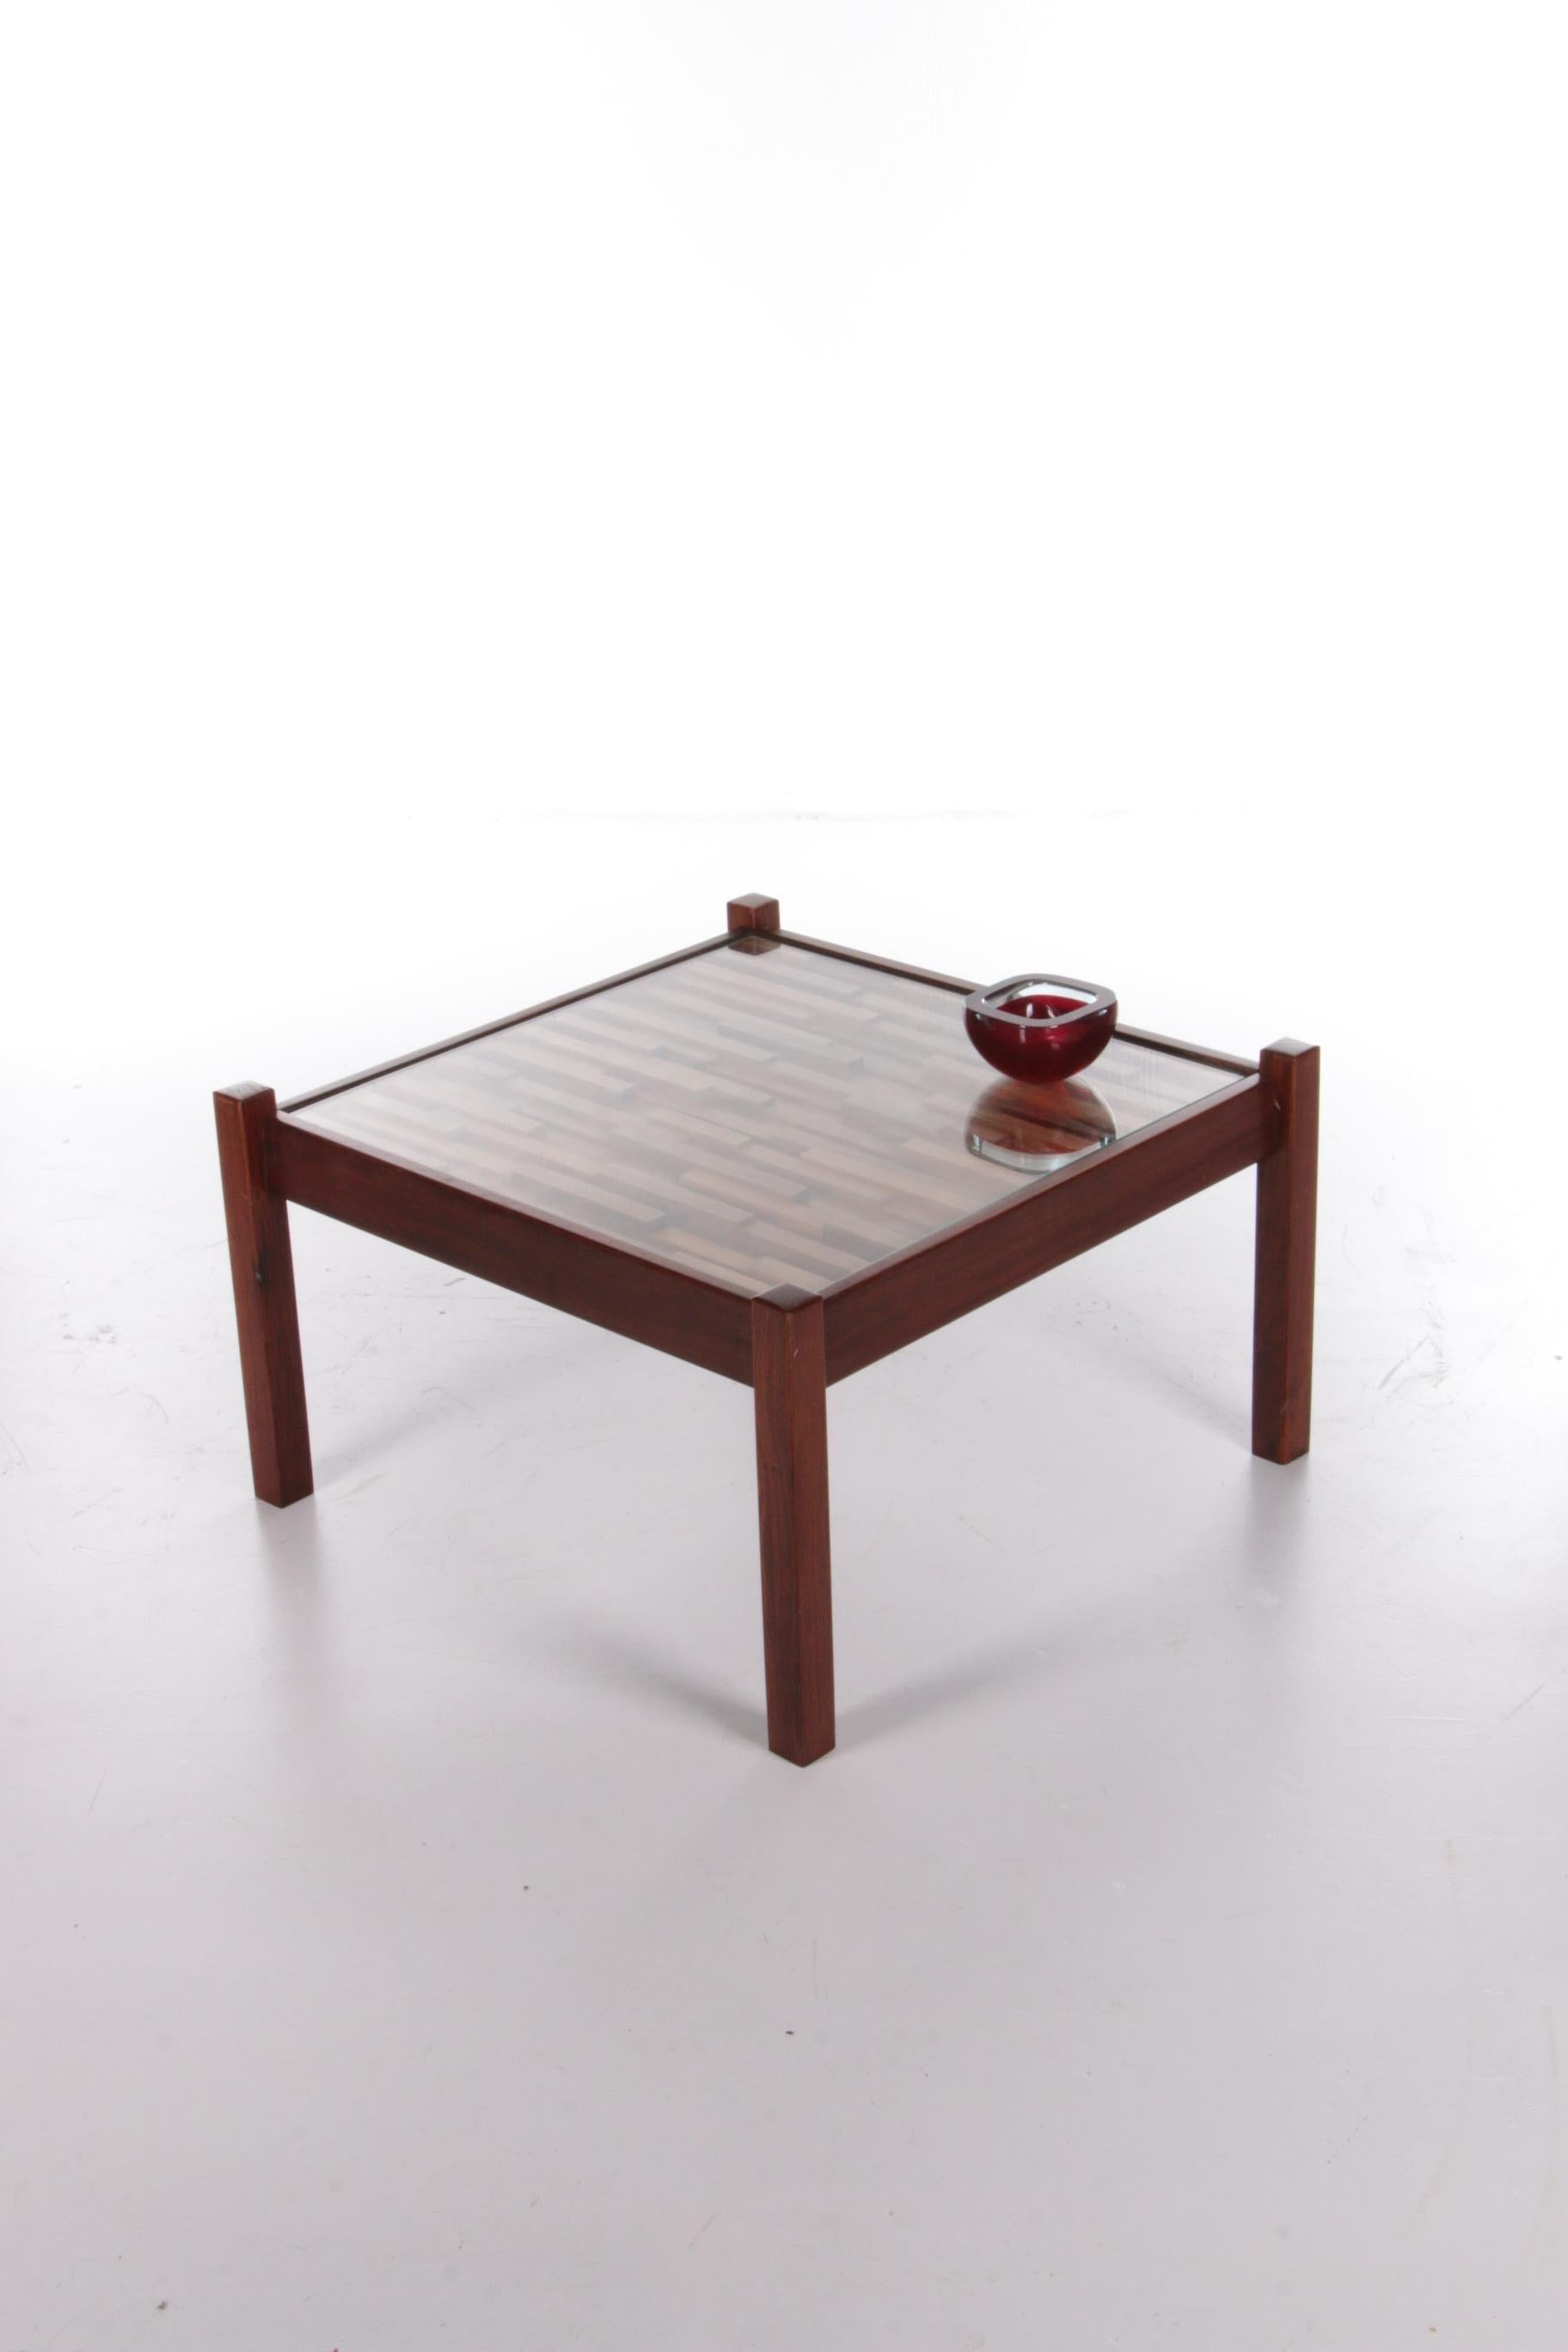 Brazilian Coffee Table design by Percival Lafer,1960s


A beautiful Brutalist coffee table by Brazilian top designer Percival Lafer

Made in the 60s.

A tropical mix of Jacaranda wooden slats and a glass plate.

The piece is in very good